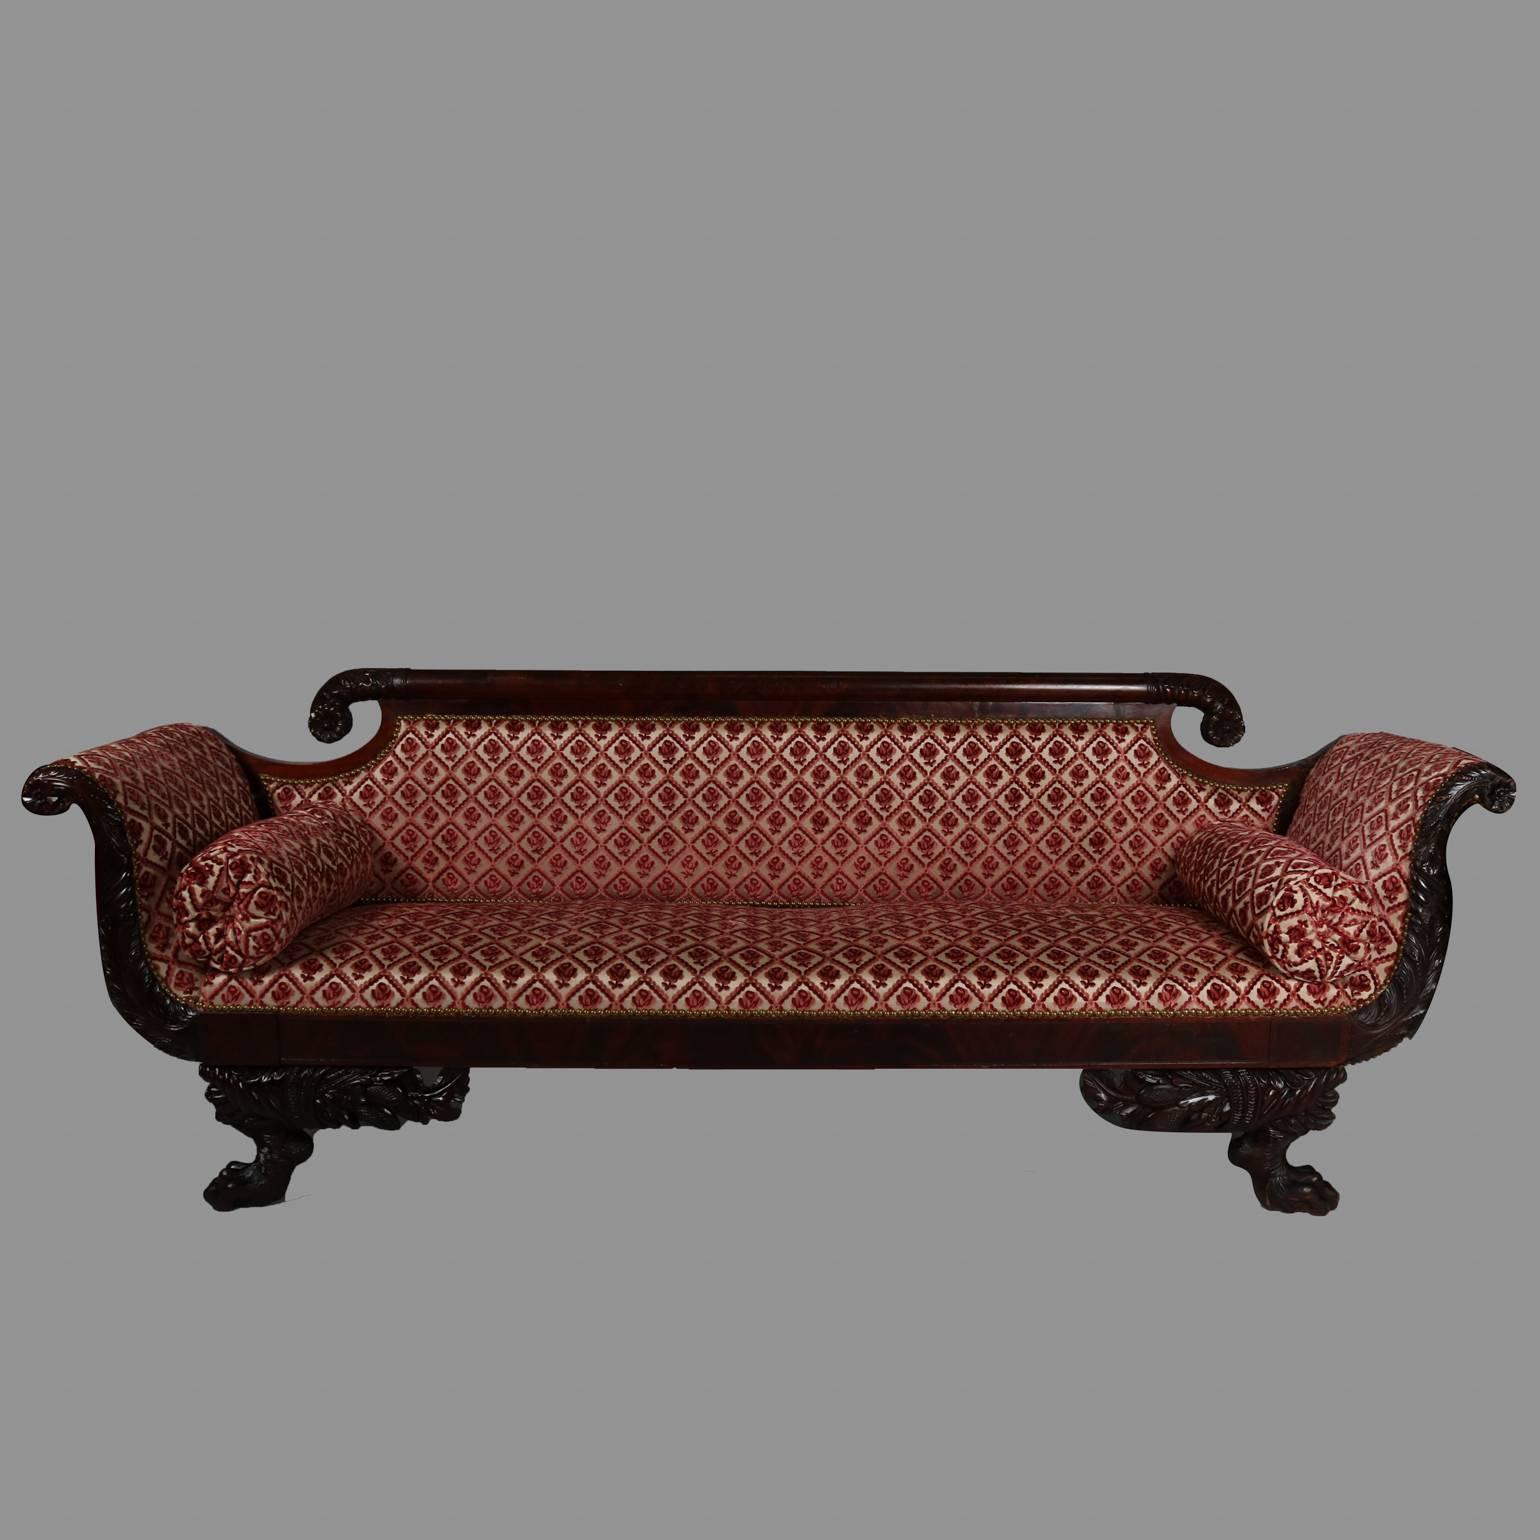 Antique American Empire Classical flame mahogany sofa features carved
acanthus scrolled arms and back, cornucopia and hairy lion paw feet with detailed knees, floral diaper pattern upholstery, 19th century.

Measures - 33